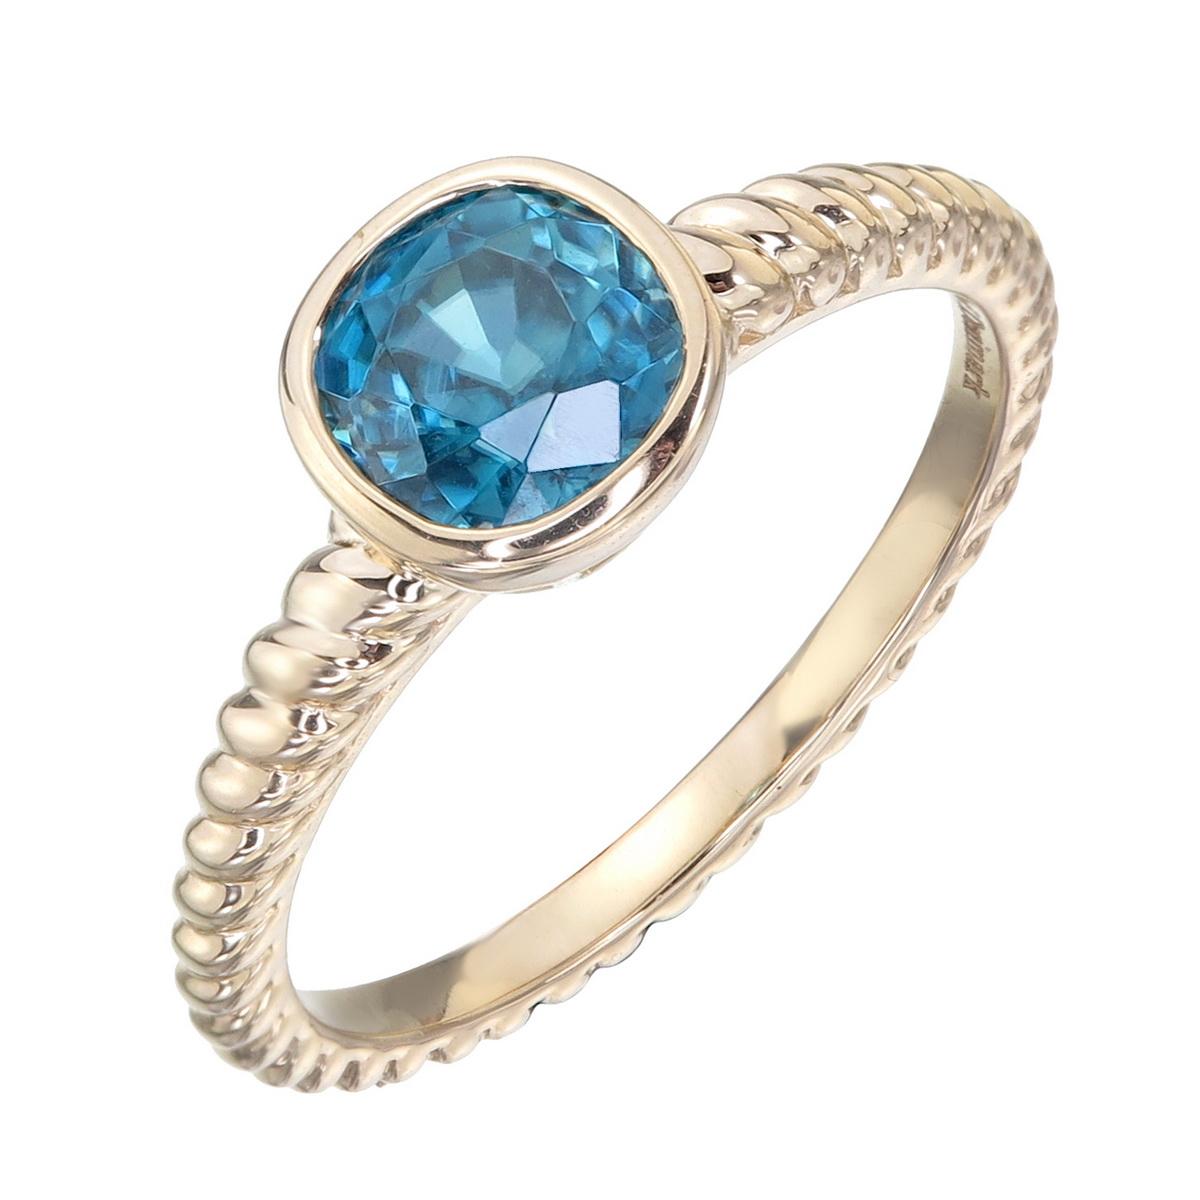 Orloff of Denmark; 14 Karat Solitaire Ring set with a spectacular 1.69 carat Ocean Blue Zircon from Ratanakiri, Cambodia.
With extraordinary brilliance and a fiery dispersion, this ocean blue zircon has been set on a 14 Karat twisted rope gold